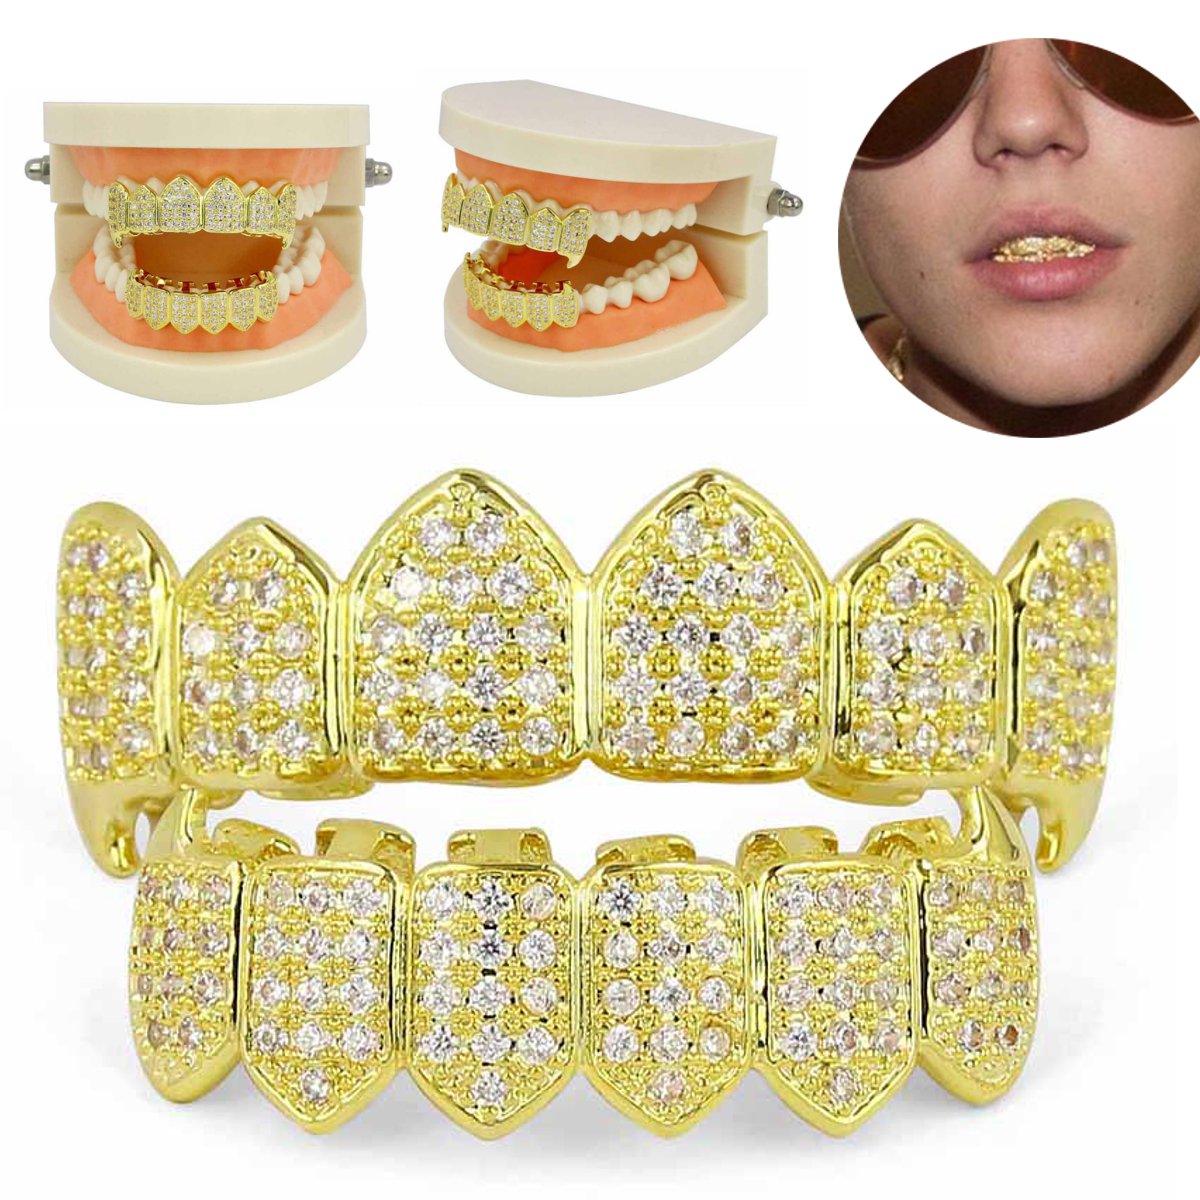 Gold-Plated-Glittering-Diamonds-Tooth-Polisher-Cap-Bottom-Mouth-1657887-1